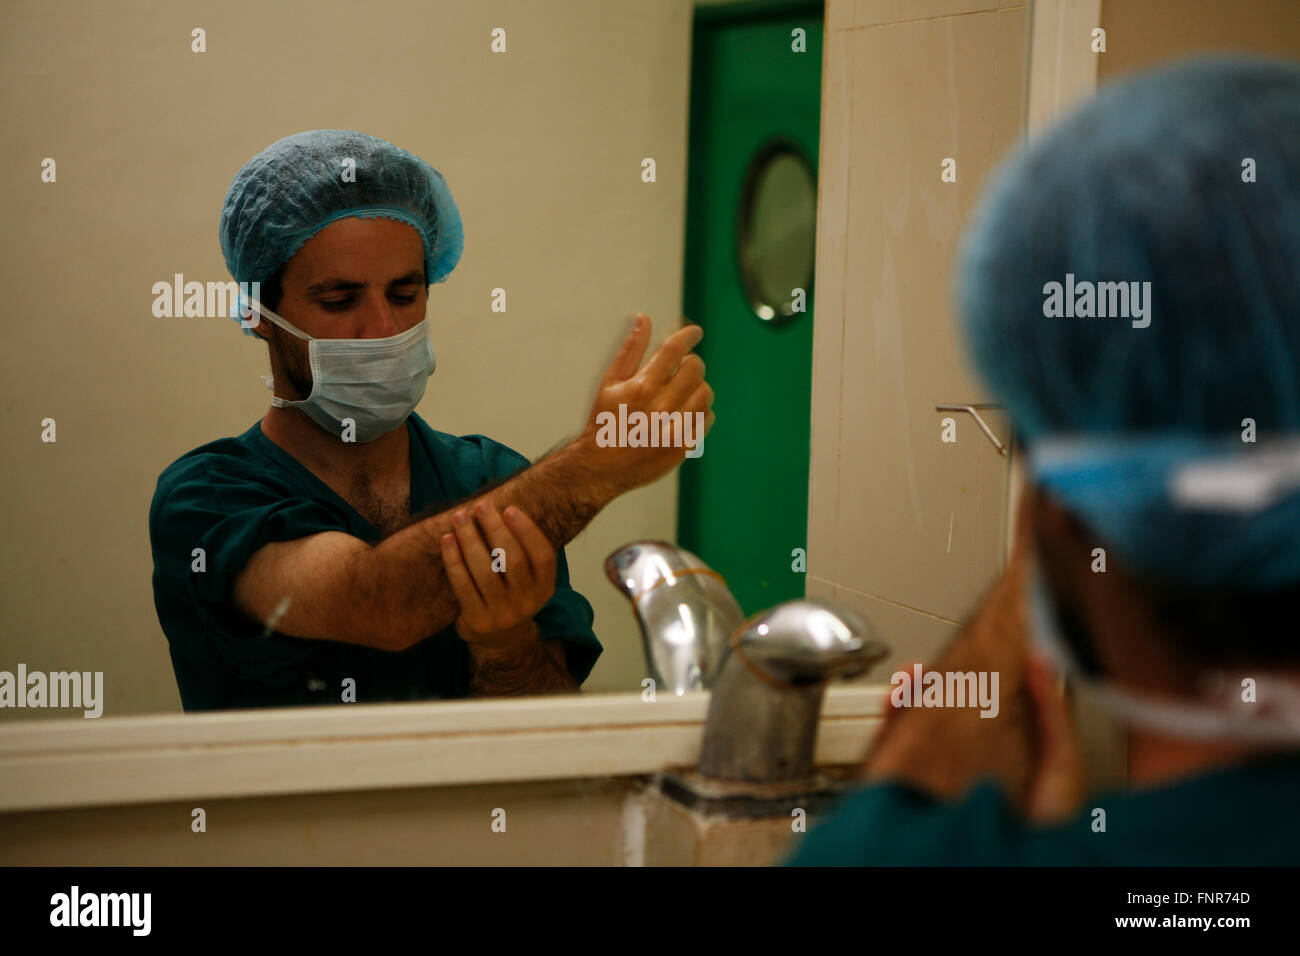 A surgeon thoroughly washing his hands and arms prior to performing surgery. Stock Photo